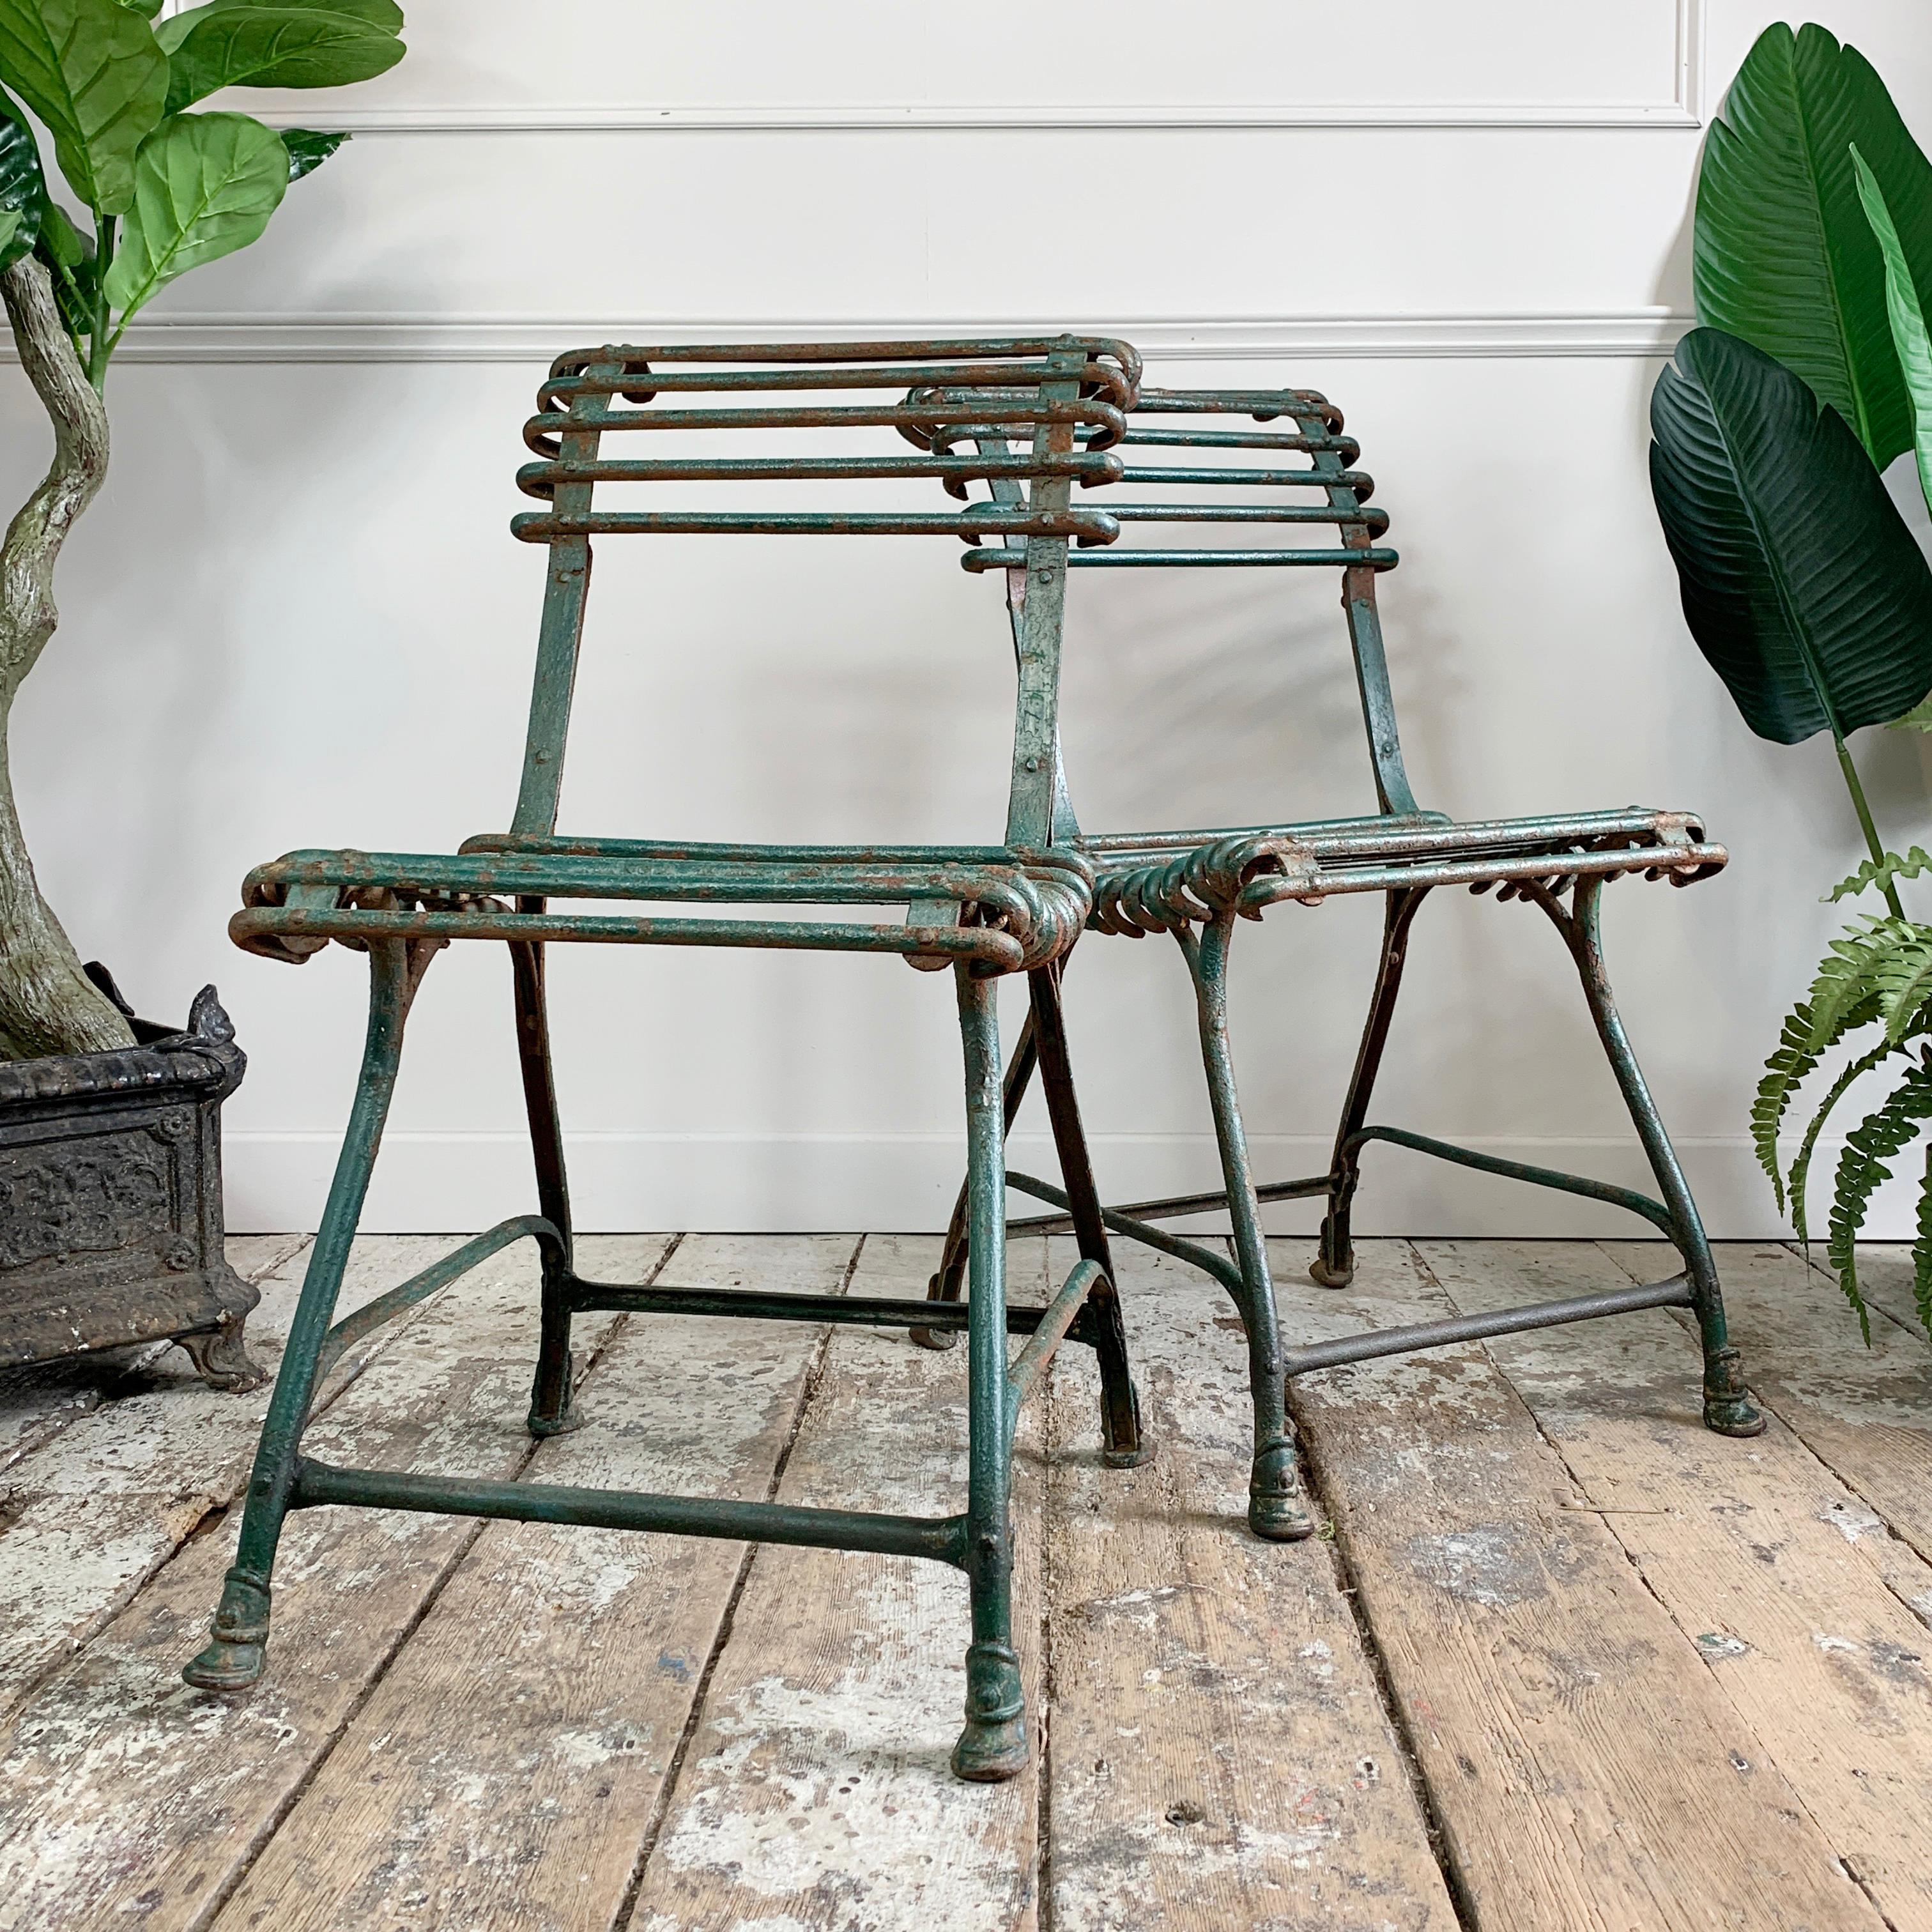 Beautiful pair of Green Arras 'Saint Sauveurs' chairs
The chairs are in good condition
Horse hoof feet
Dating circa 1910, From one of the factories in arras producing this type of garden furniture at the time
The original brass manufacturer’s